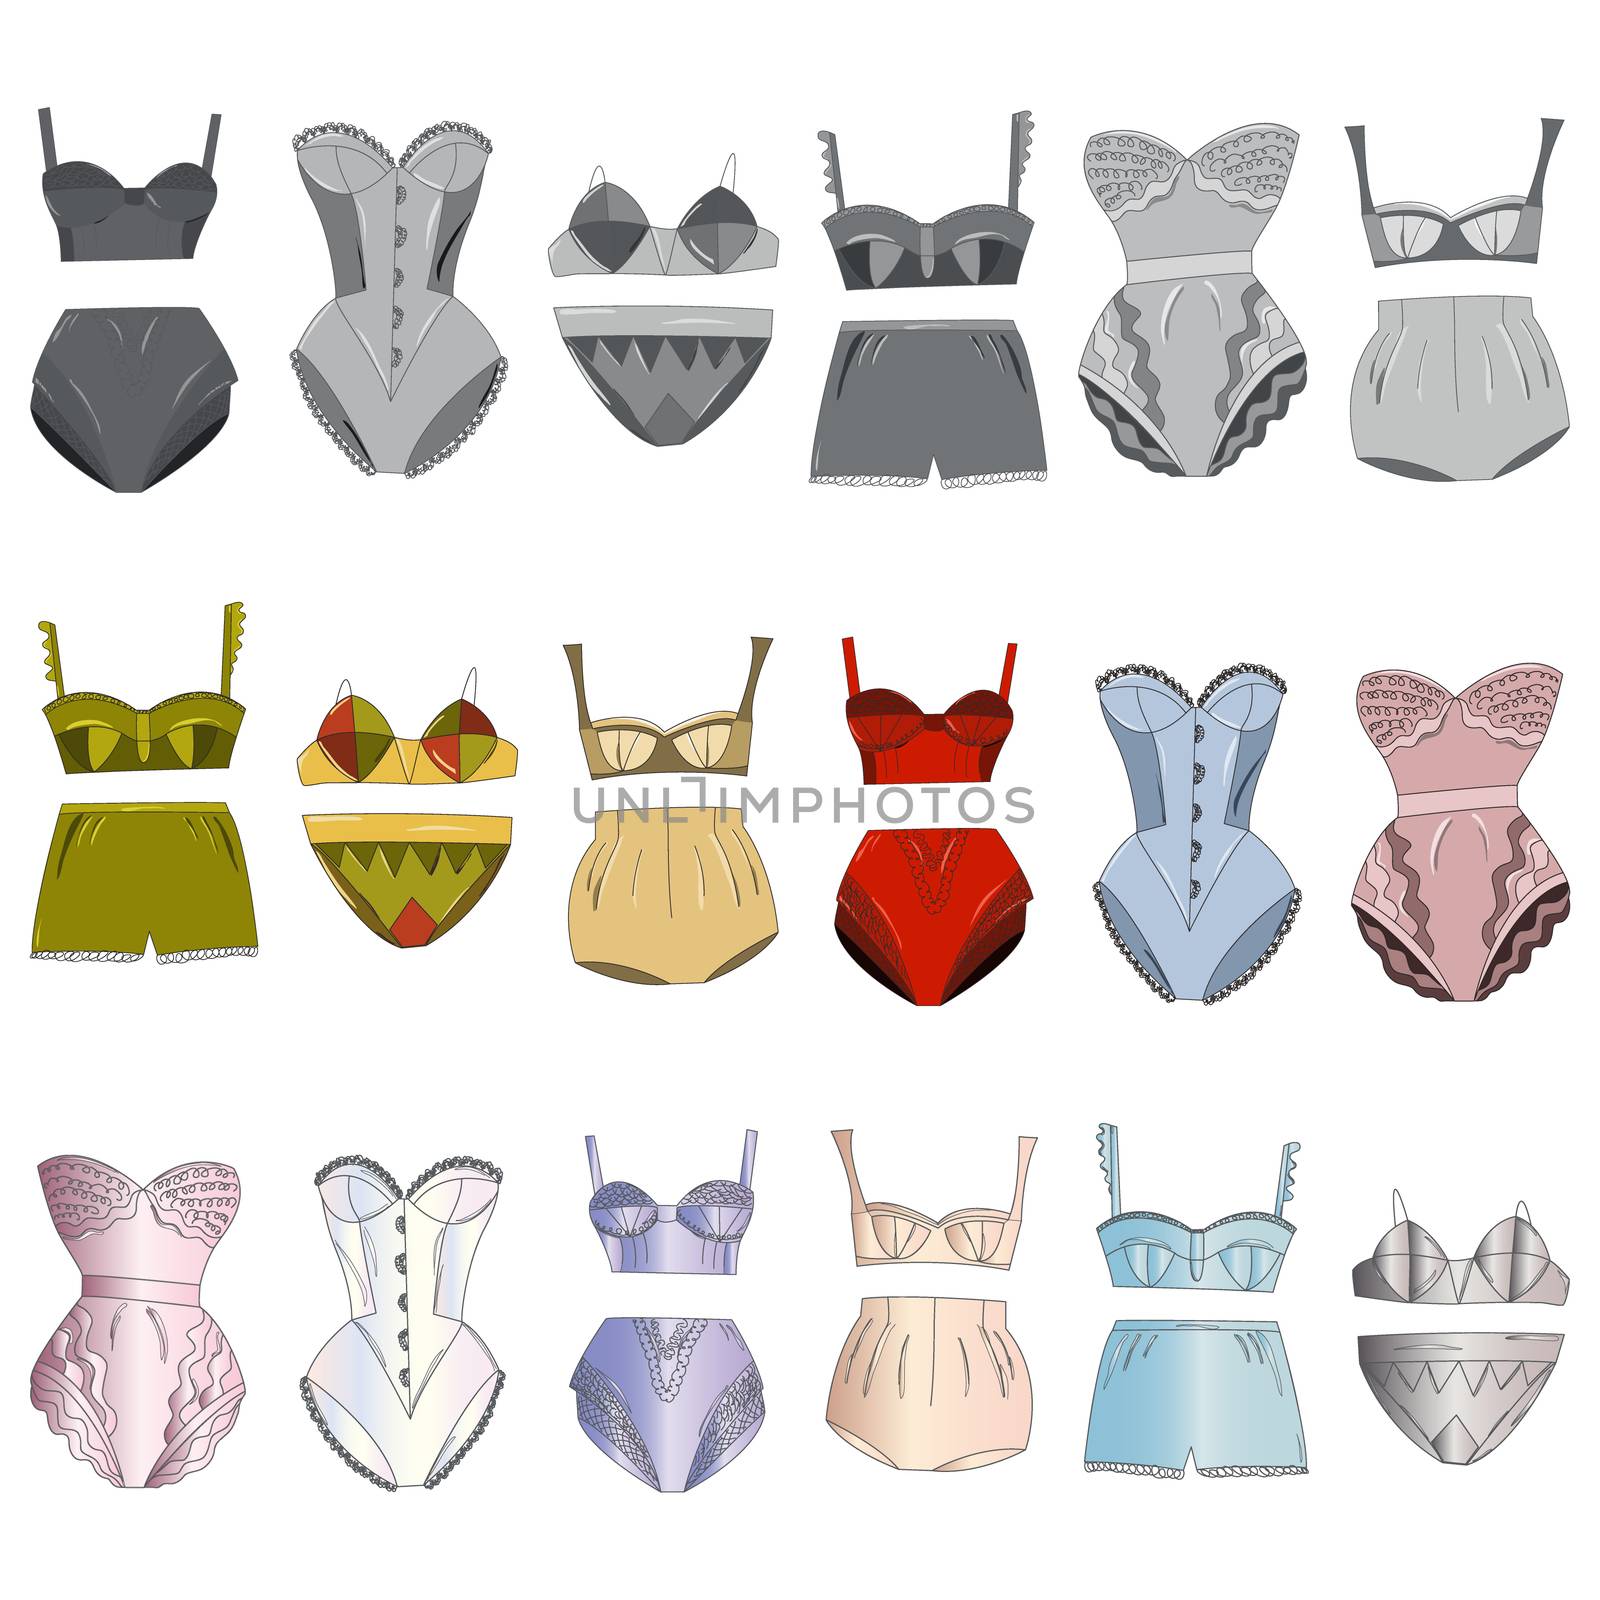 Line art female lingerie collection. Lace and silk underwear set , panties, bras, knickers isolated on white background. Vector illustration.